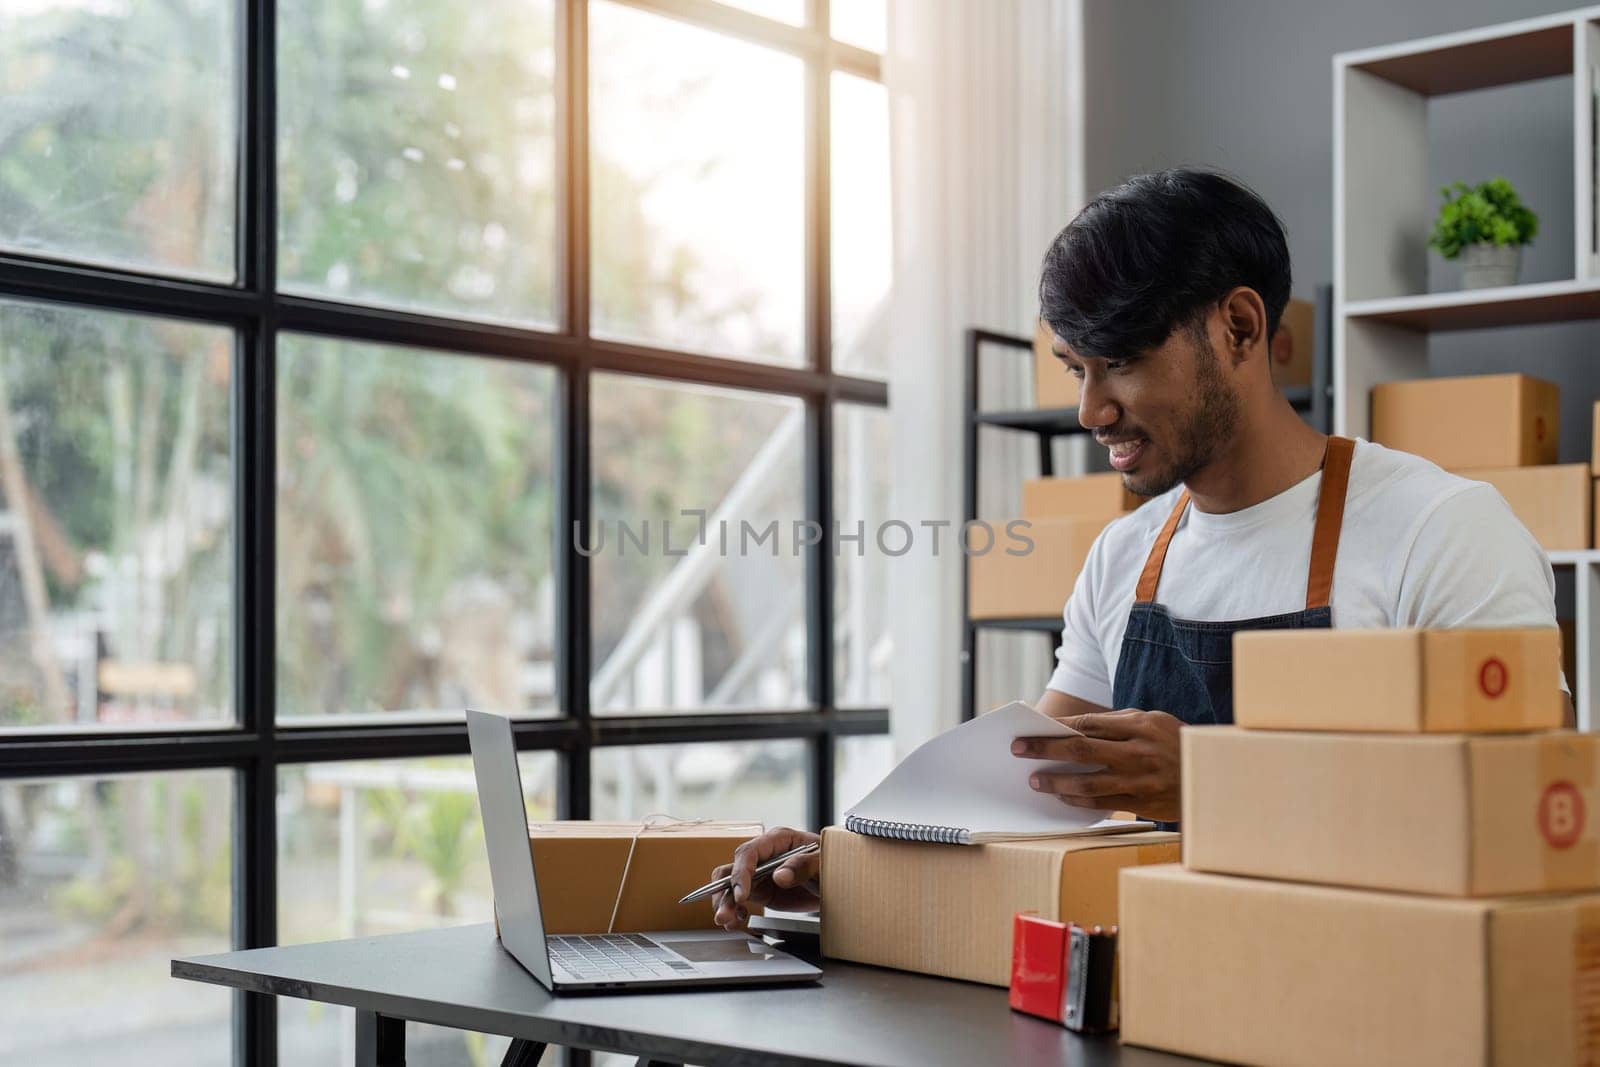 Online business ideas Asian man selling things online holding parcel boxes preparing to deliver to customers with joy.